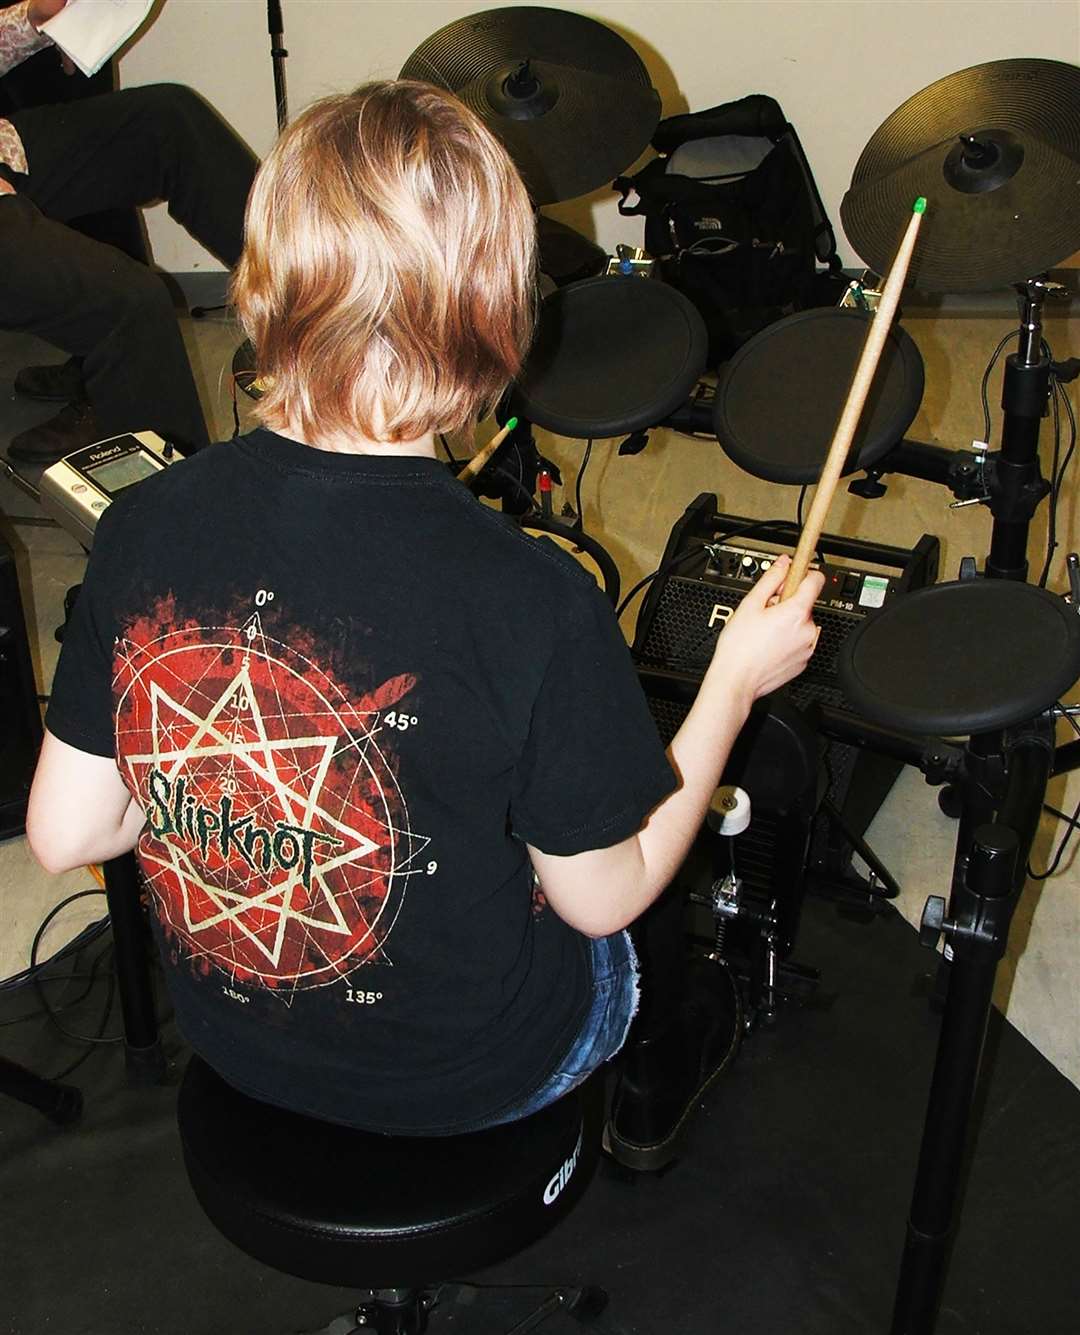 Drumming tuned brain networks in autistic children (University of Chichester/PA)